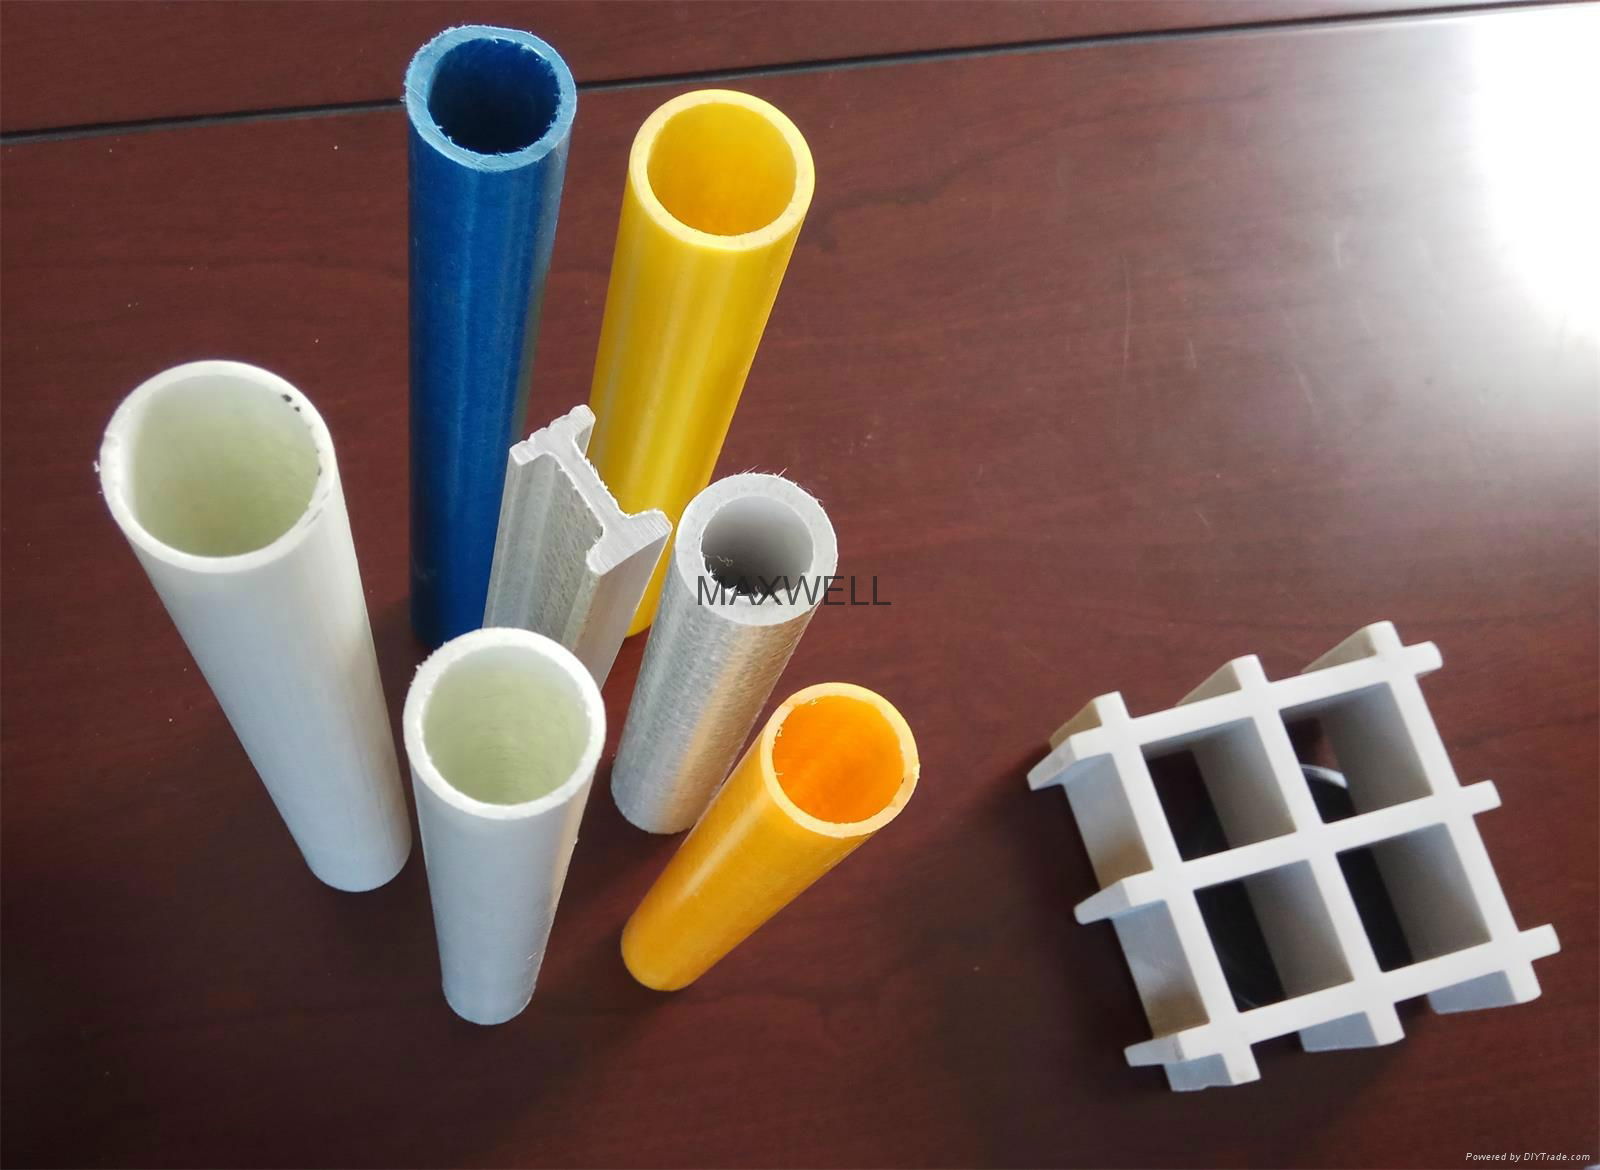 Pultruded fiberglass pipe and glassfibre reinforced tube